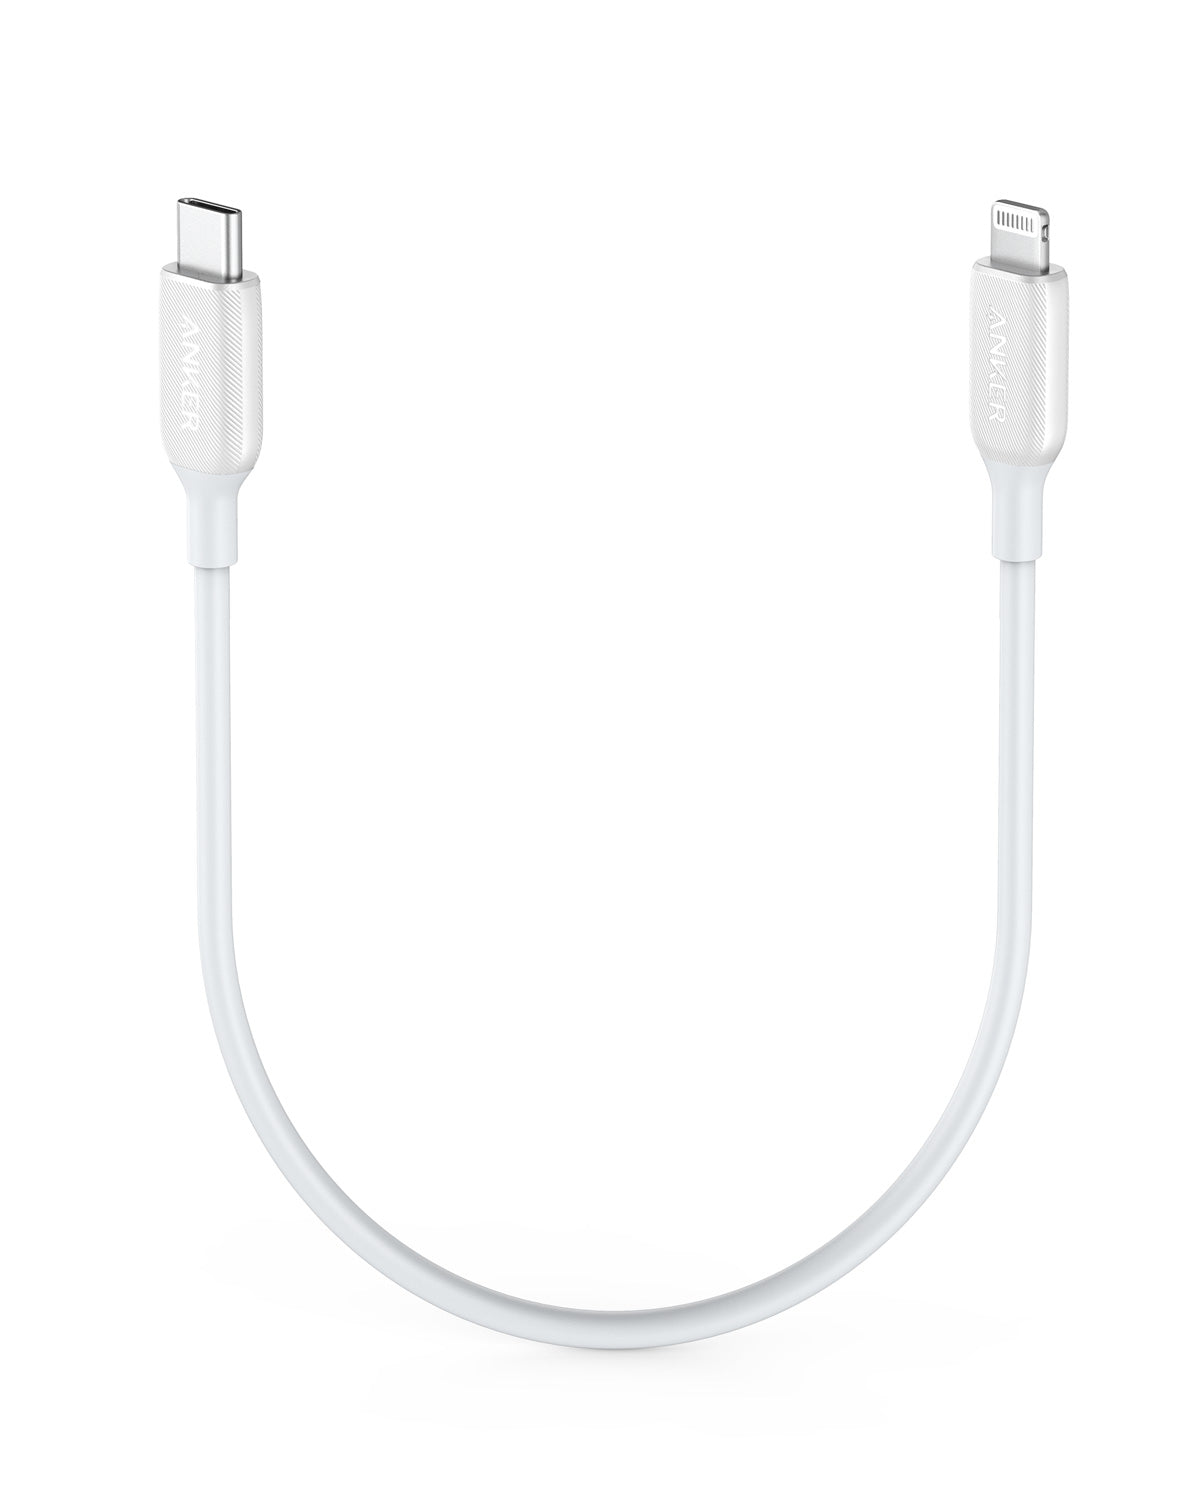 Saun World iPhone Og cable [Apple MFi Certified] USB C to Lightning Cable  White Power Meter for Cables Price in India - Buy Saun World iPhone Og cable  [Apple MFi Certified] USB